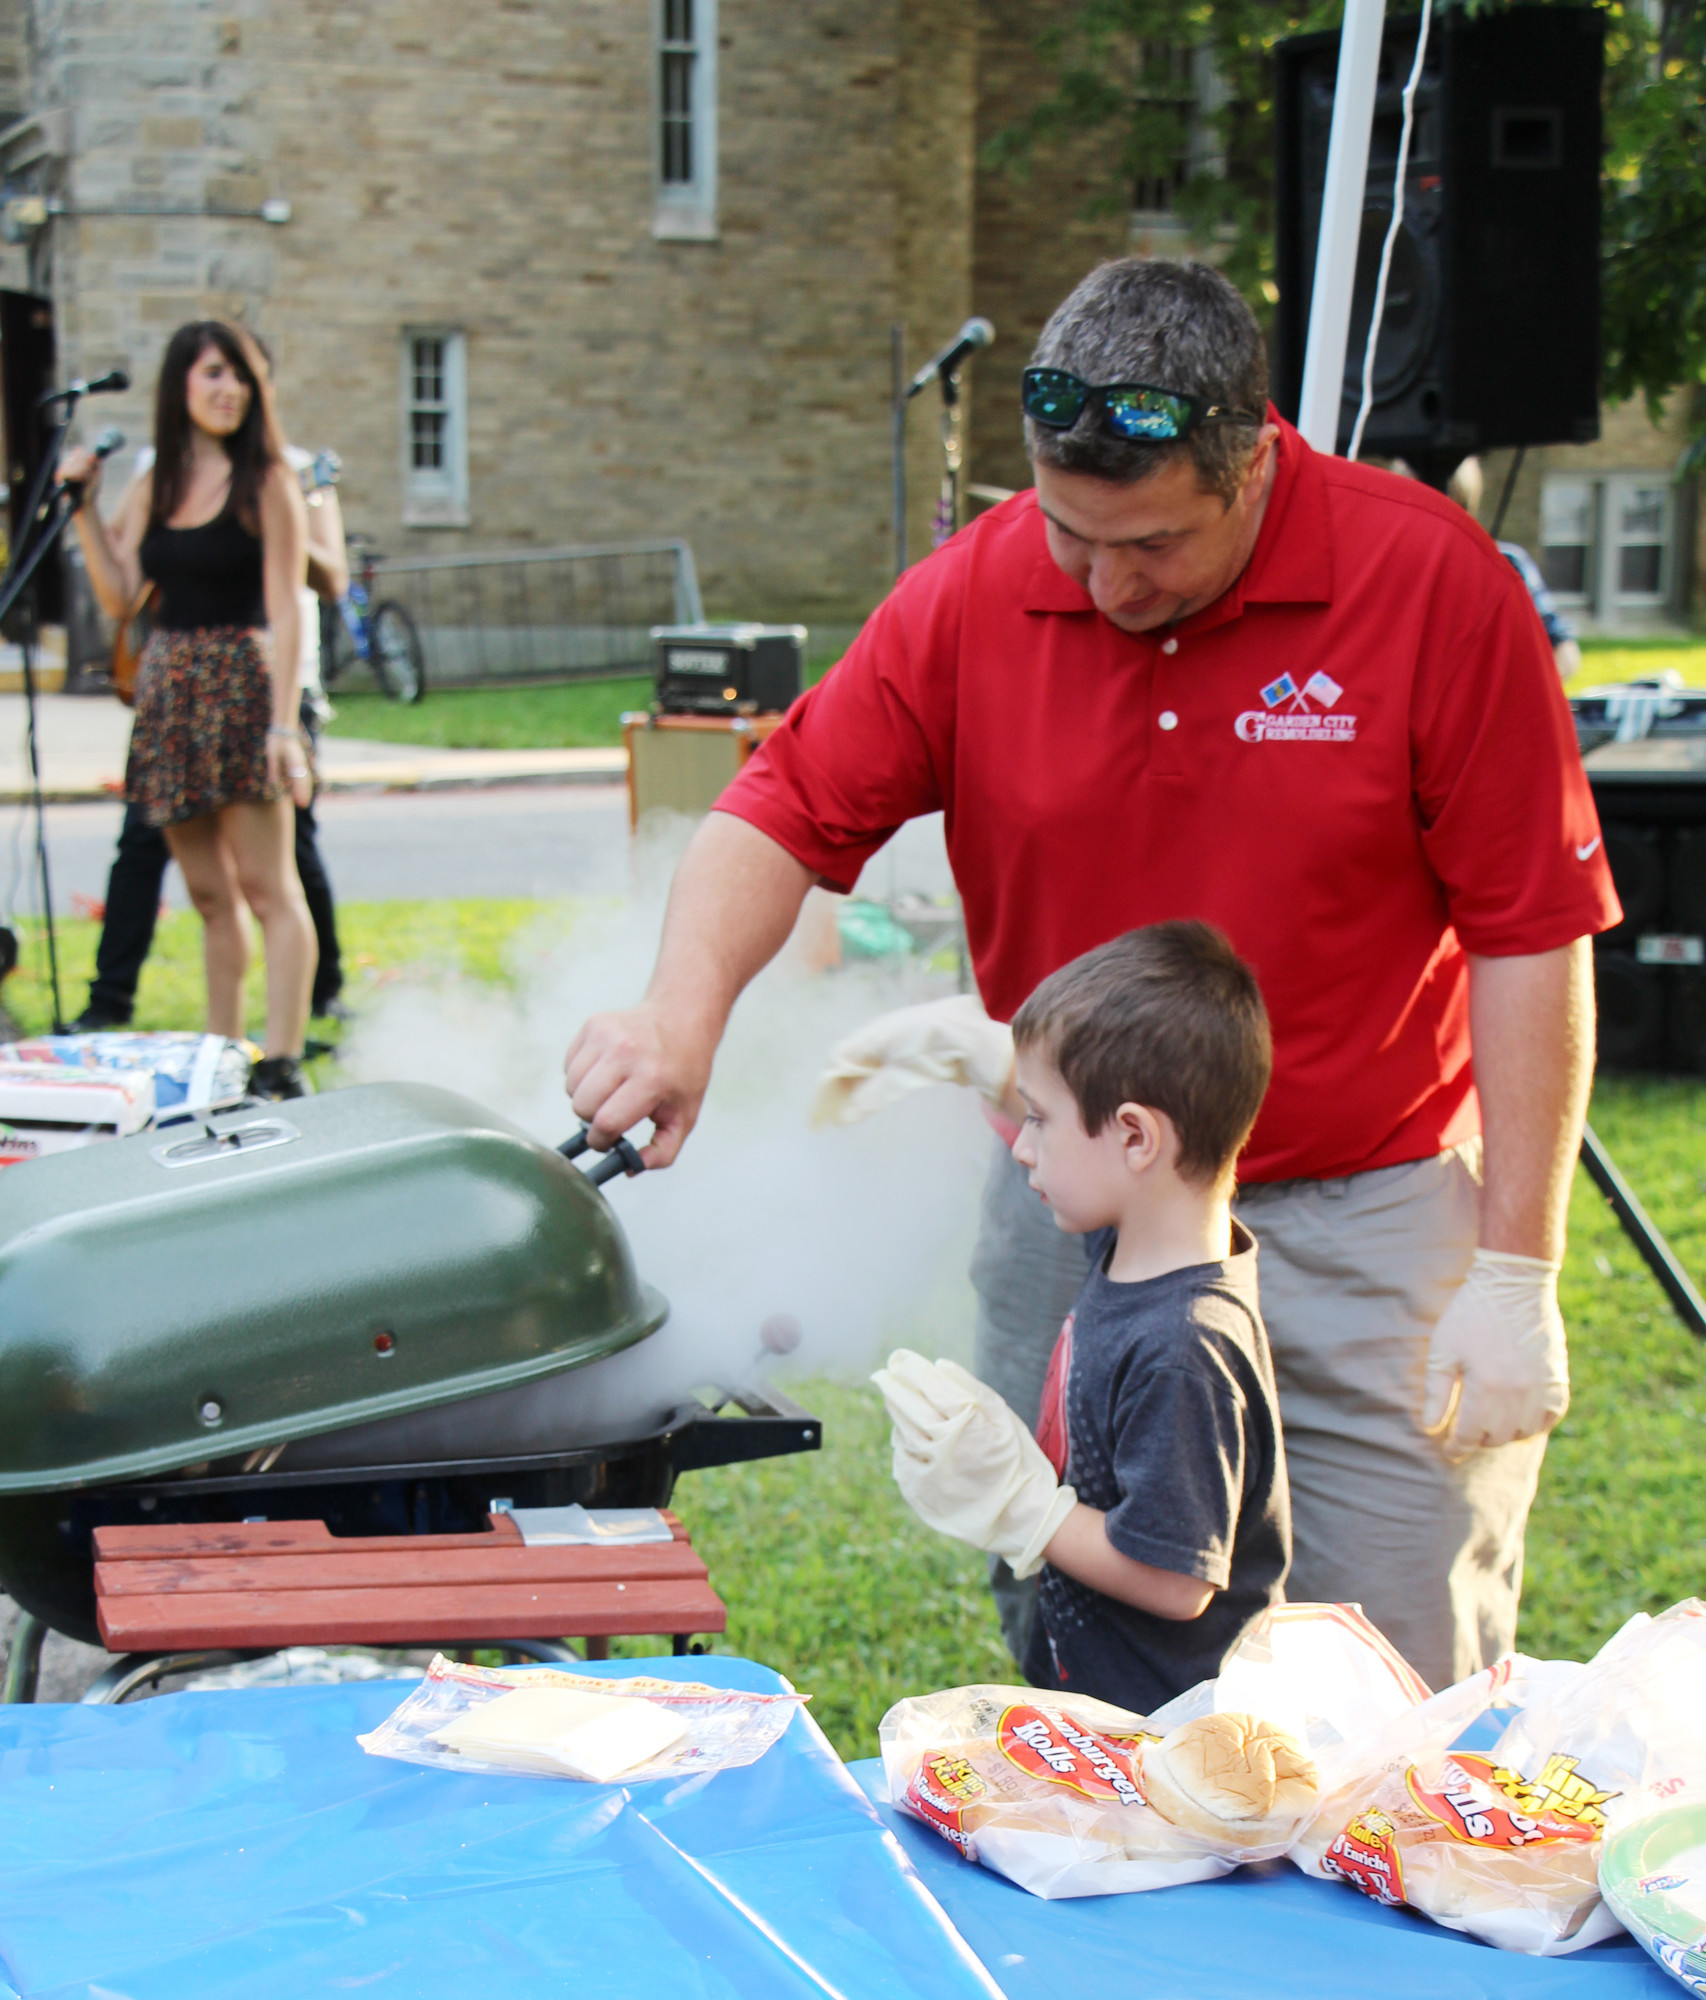 Mike Nickich and his son Mikey served burgers, hot dogs and other snacks to the crowd at St. Mark’s Church.